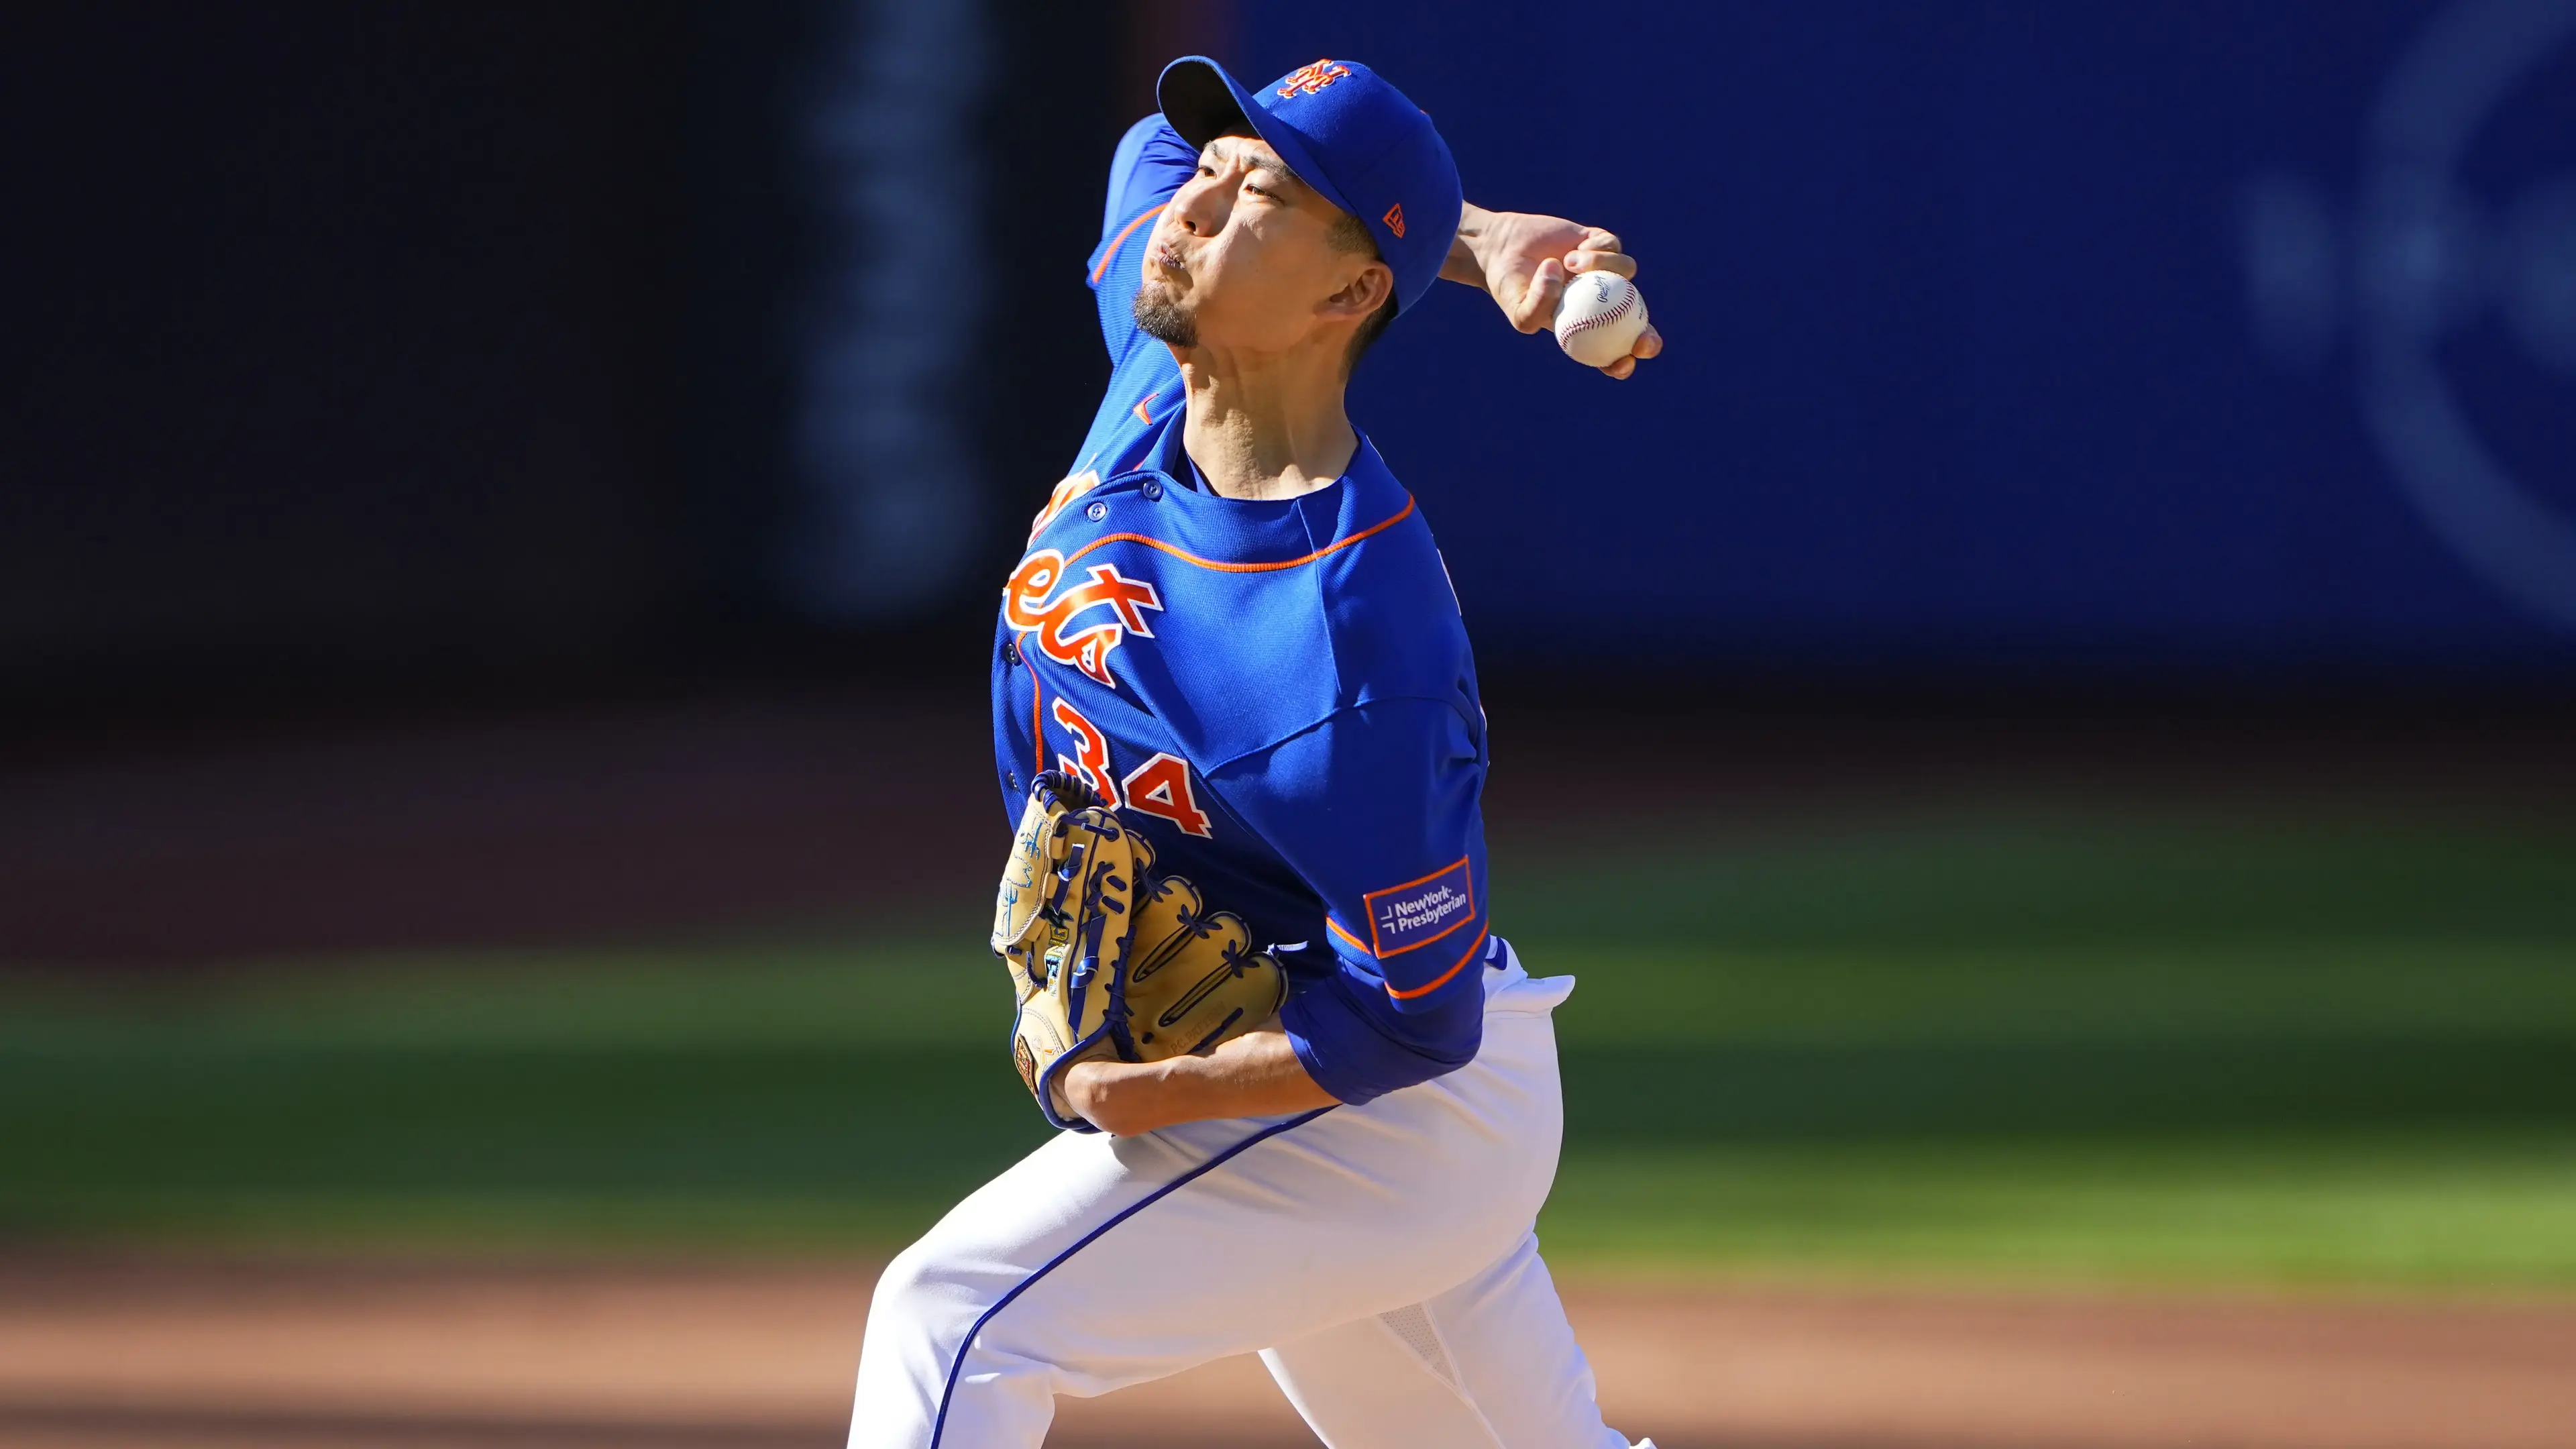 New York Mets pitcher Kodai Senga (34) delivers a pitch against the Arizona Diamondbacks during the first inning at Citi Field / Gregory Fisher - USA TODAY Sports